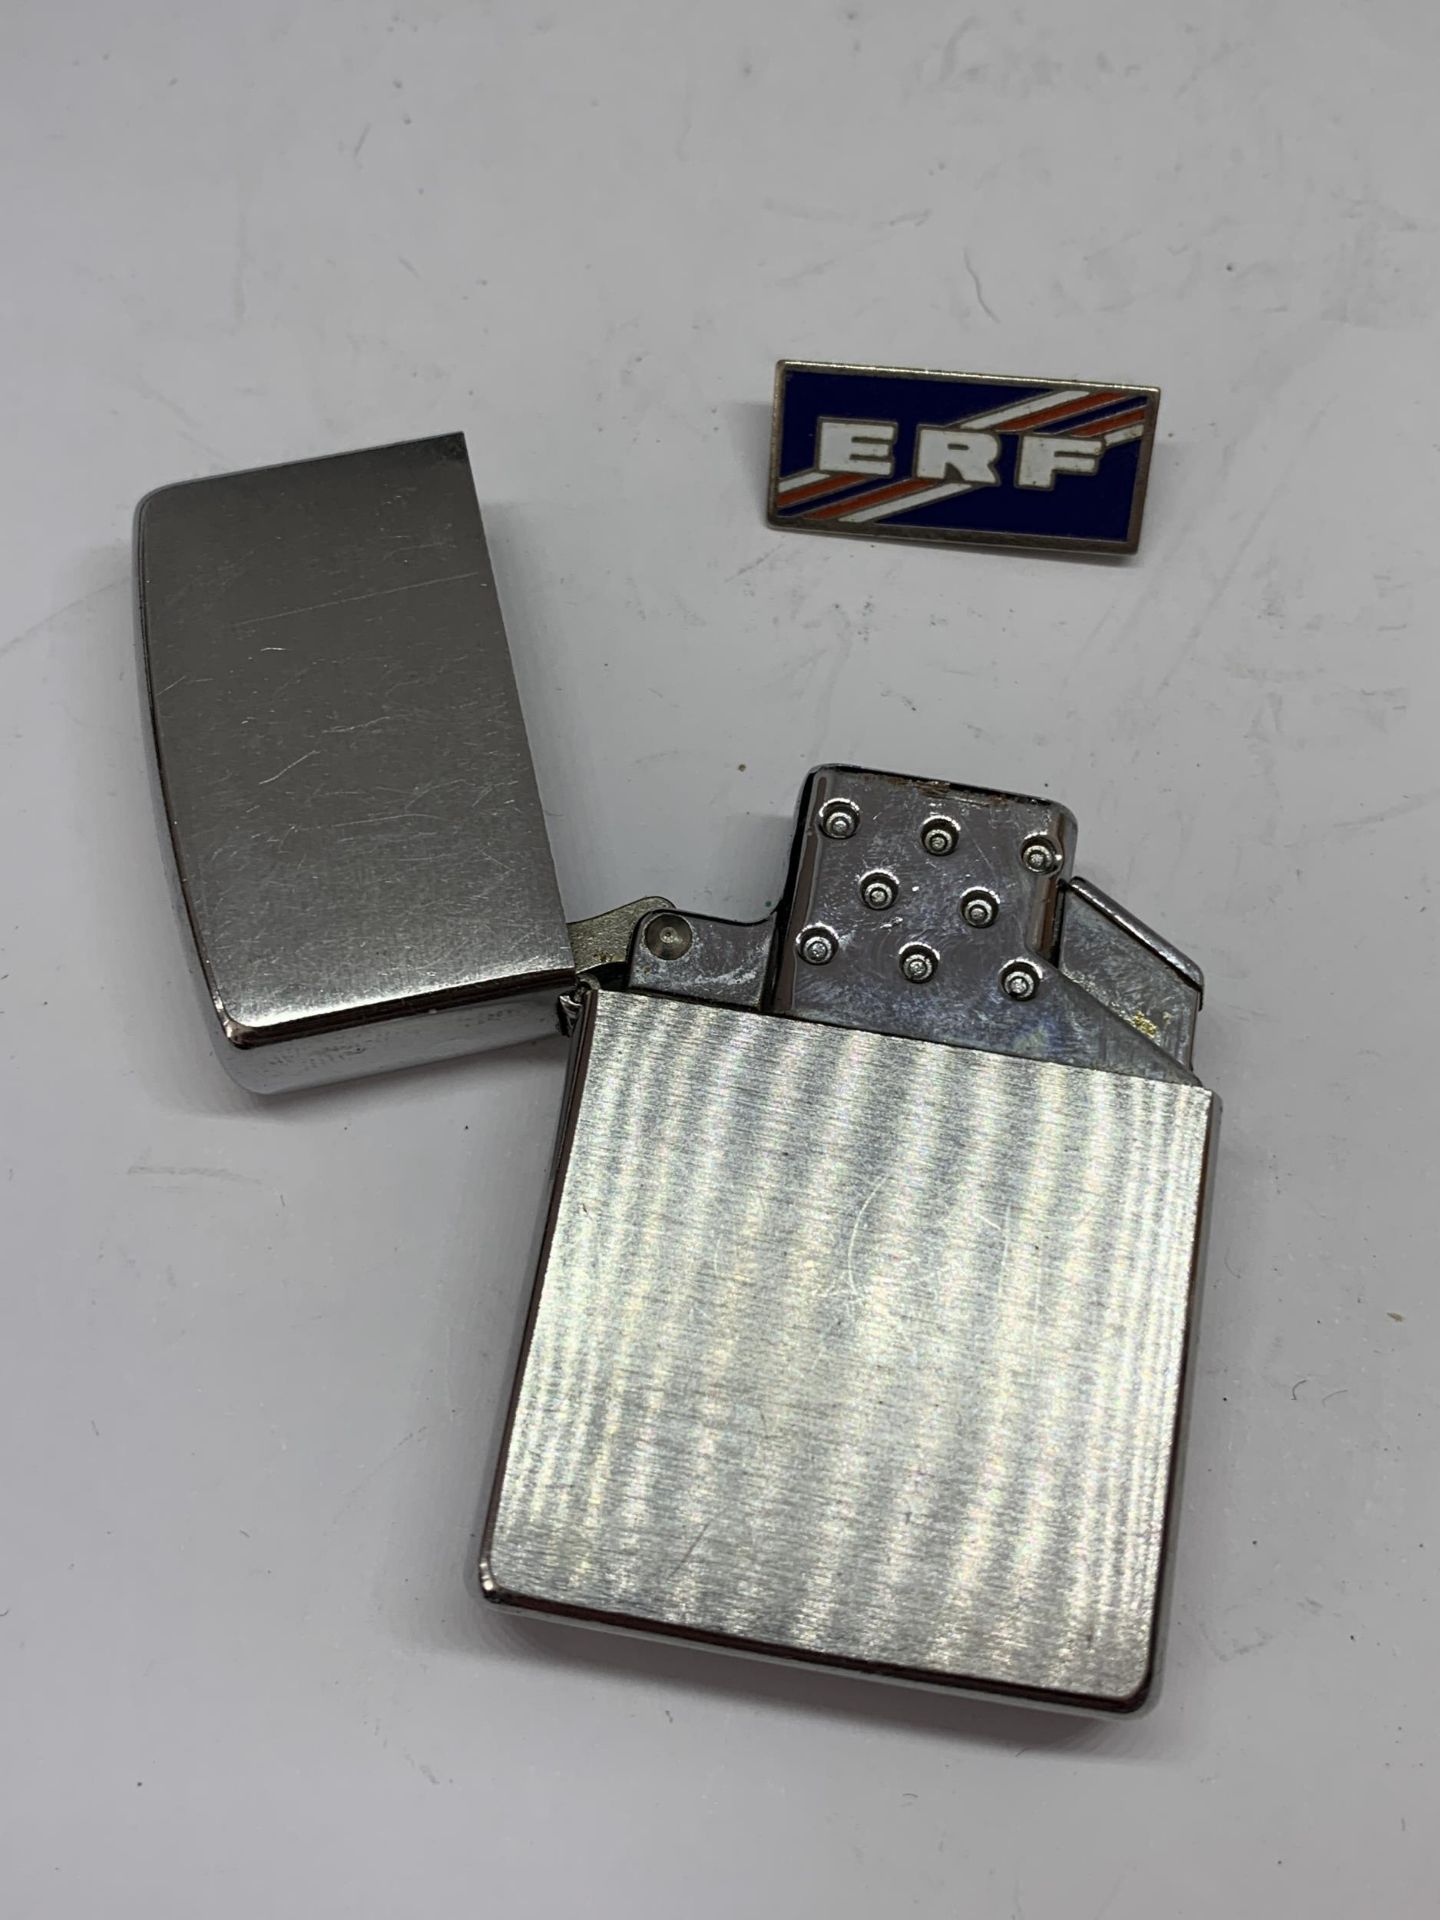 A MADE IN USA ZIPPO LIGHTER AND AN ENAMEL ERF BADGE - Image 2 of 3